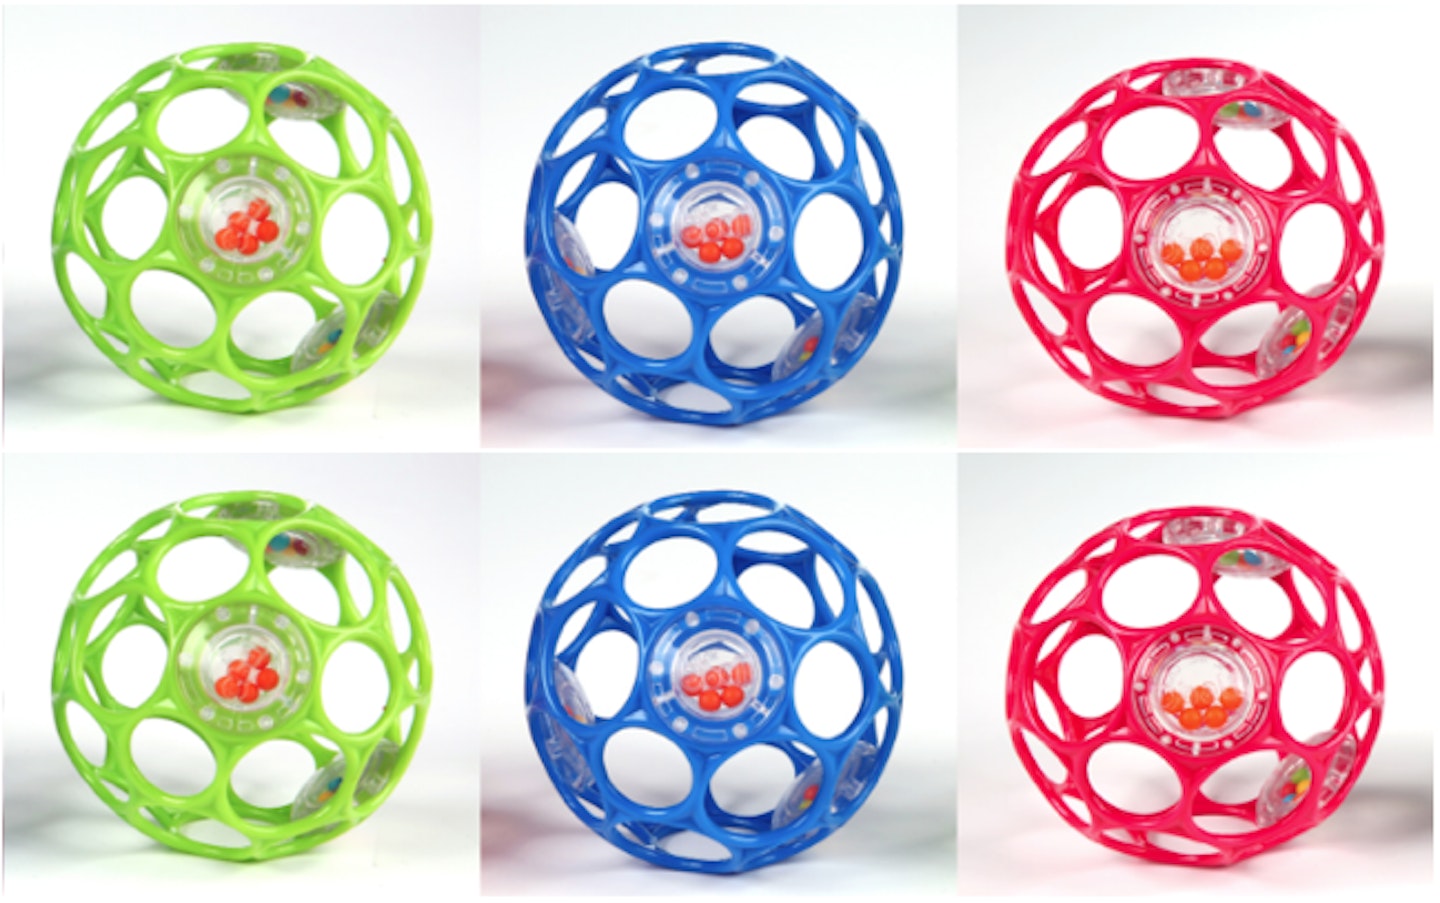 Oball rattle recall